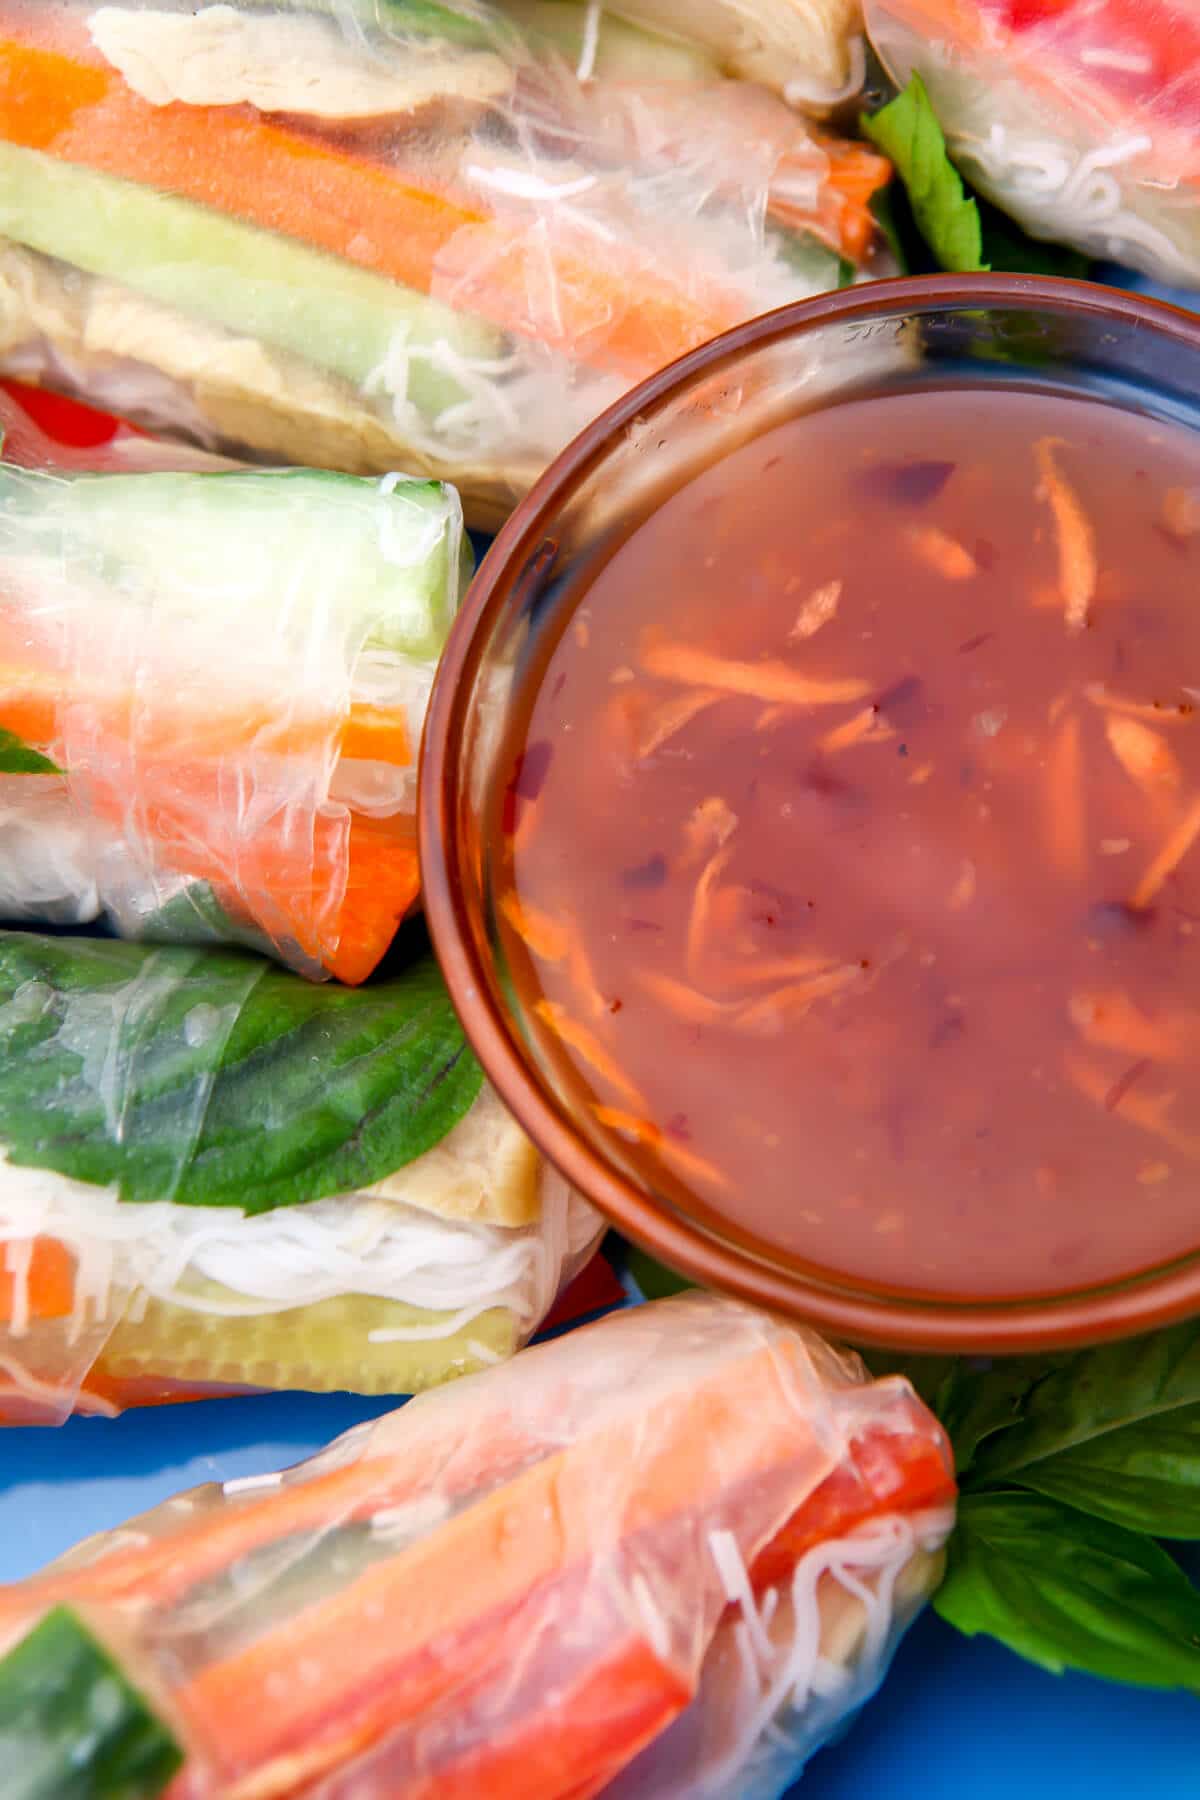 A top view of a bowl of sweet Thai chili dipping sauce next to summer rolls.